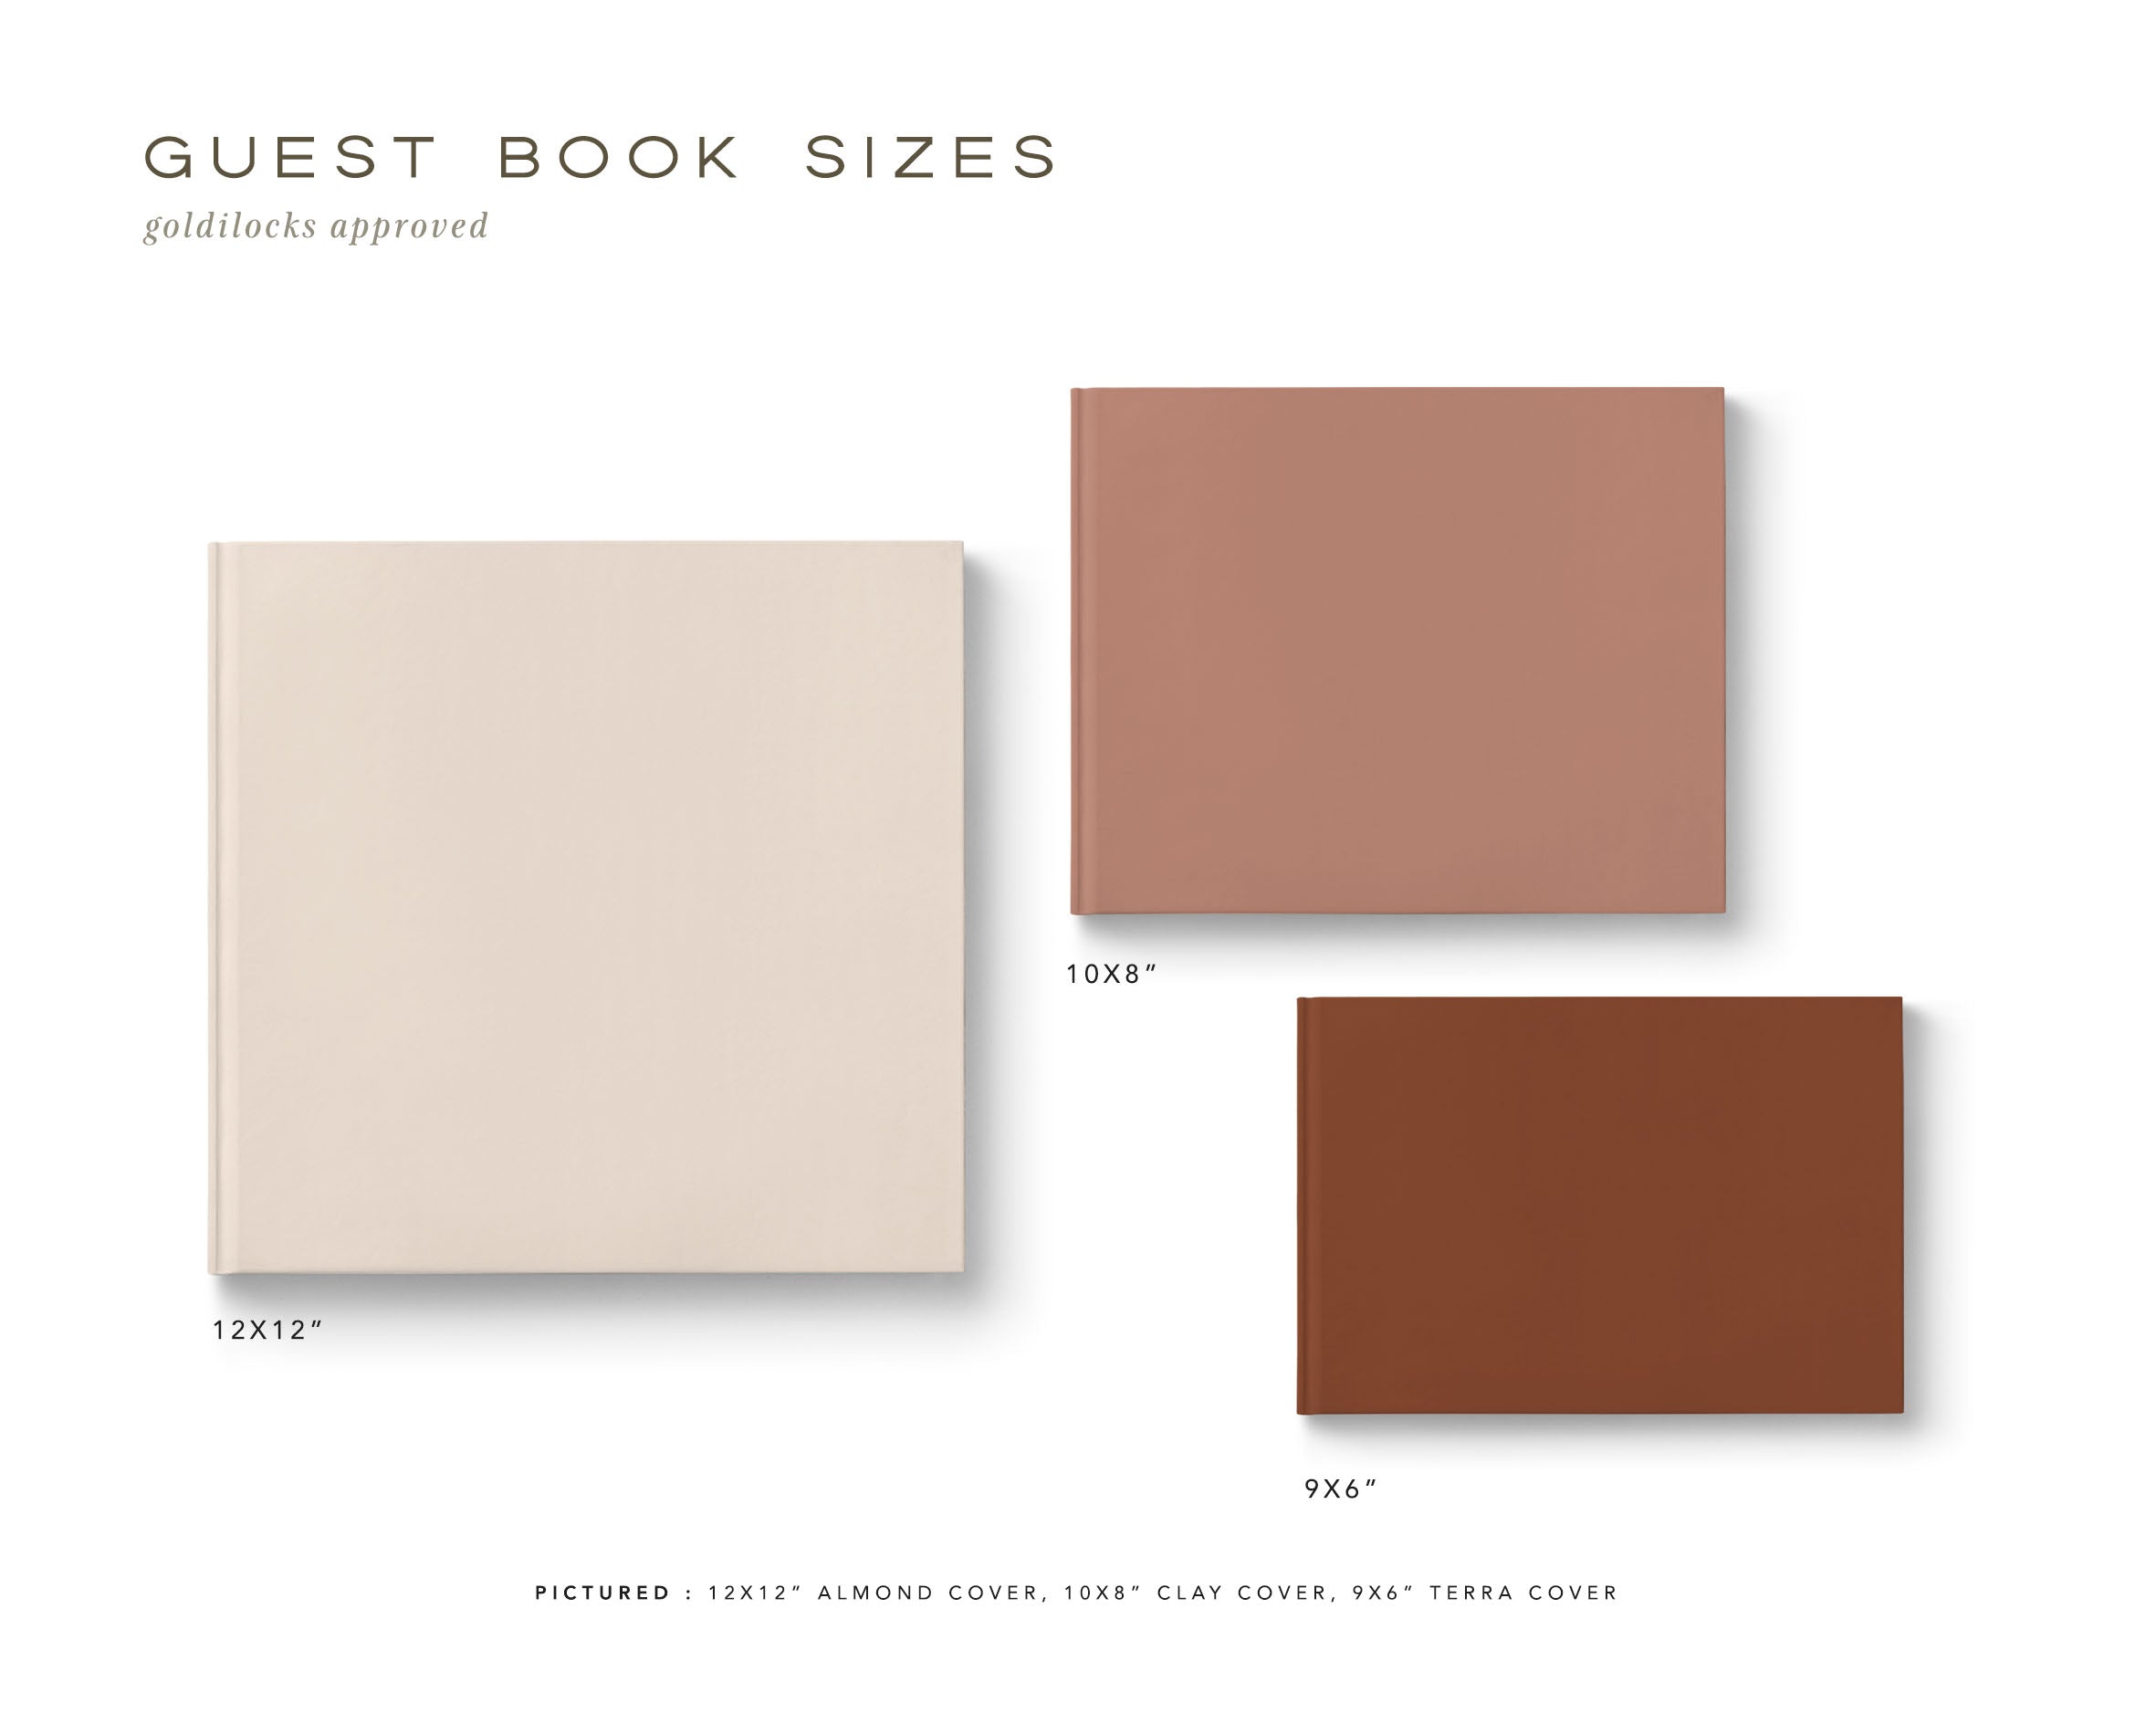 Wedding guestbook size options, 9x6", 10x8", 12x12".